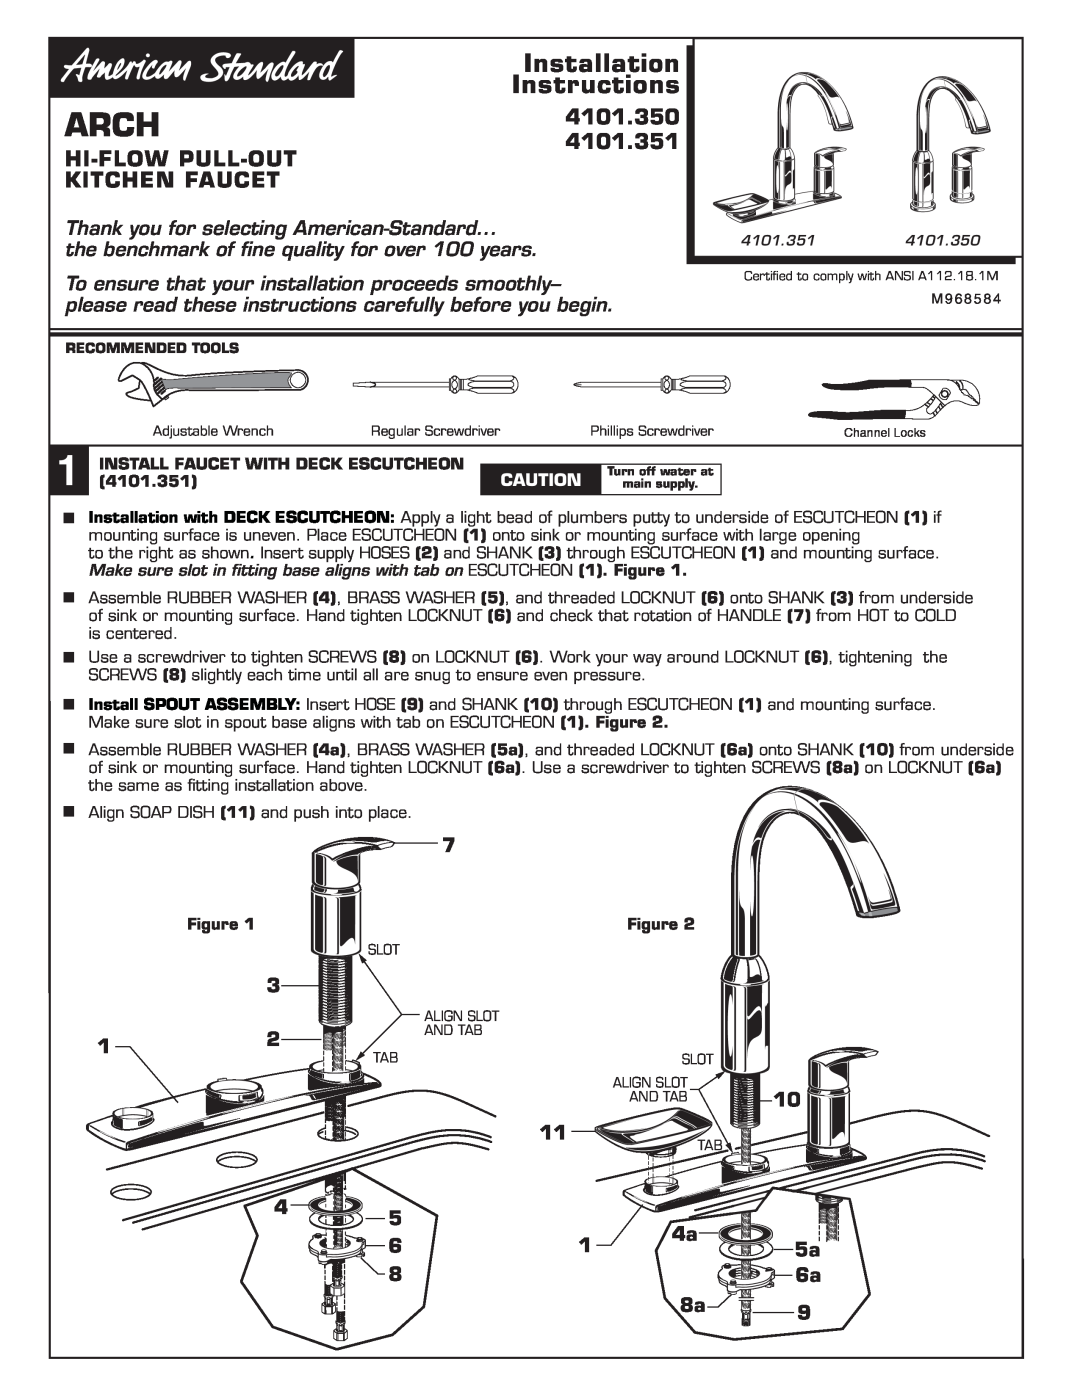 American Standard 4101.351 installation instructions Arch, 4101.350, Hi-Flow Pull-Out, Kitchen Faucet, Installation 